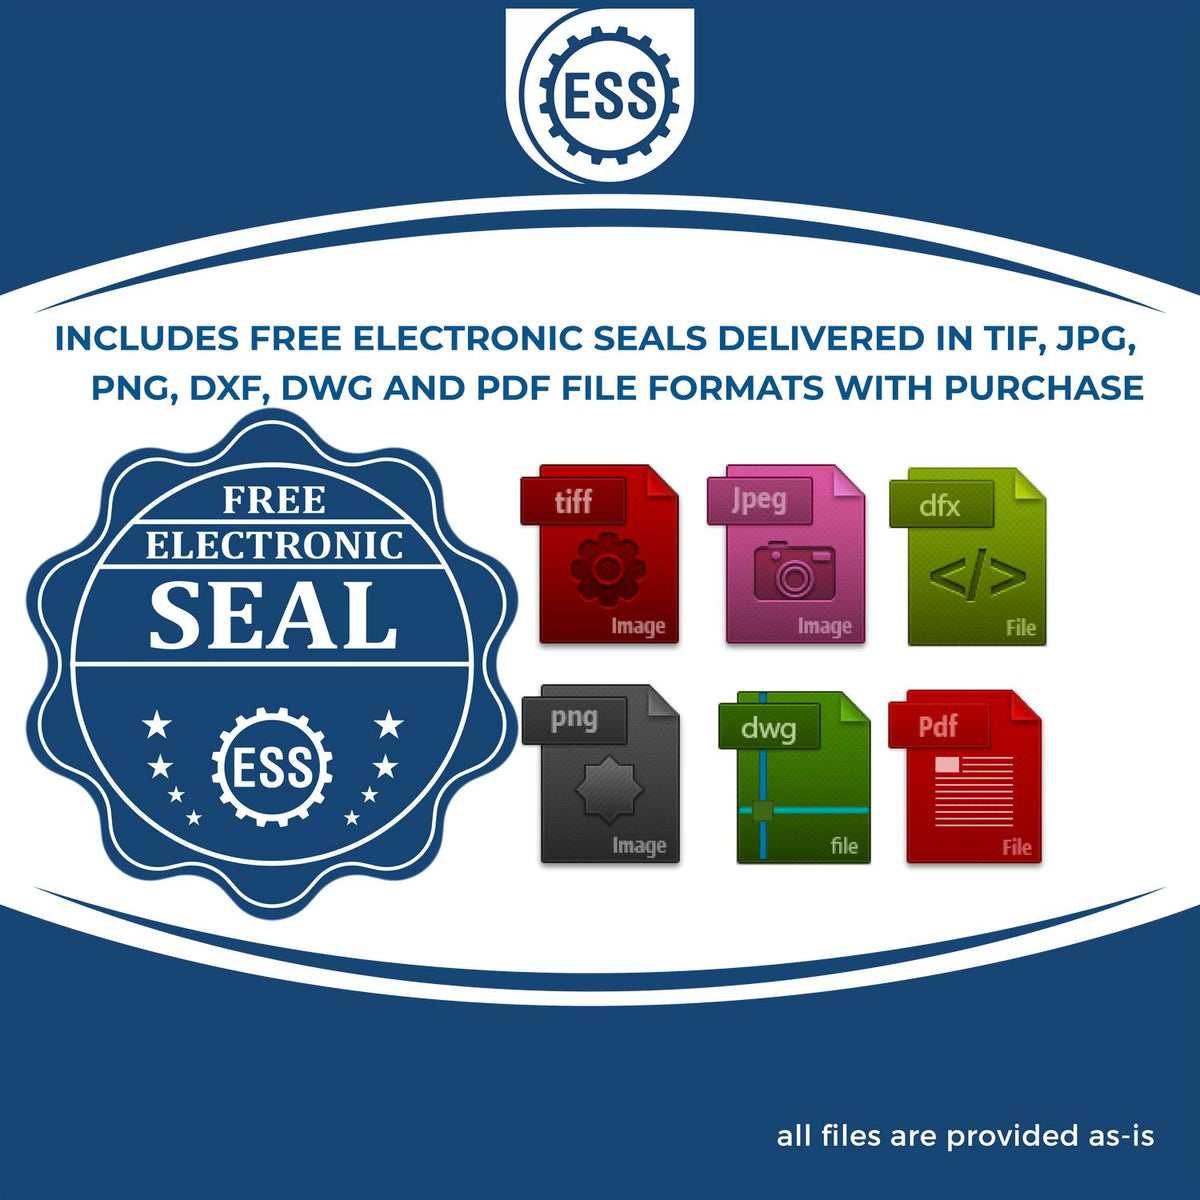 An infographic for the free electronic seal for the Soft West Virginia Professional Geologist Seal illustrating the different file type icons such as DXF, DWG, TIF, JPG and PNG.